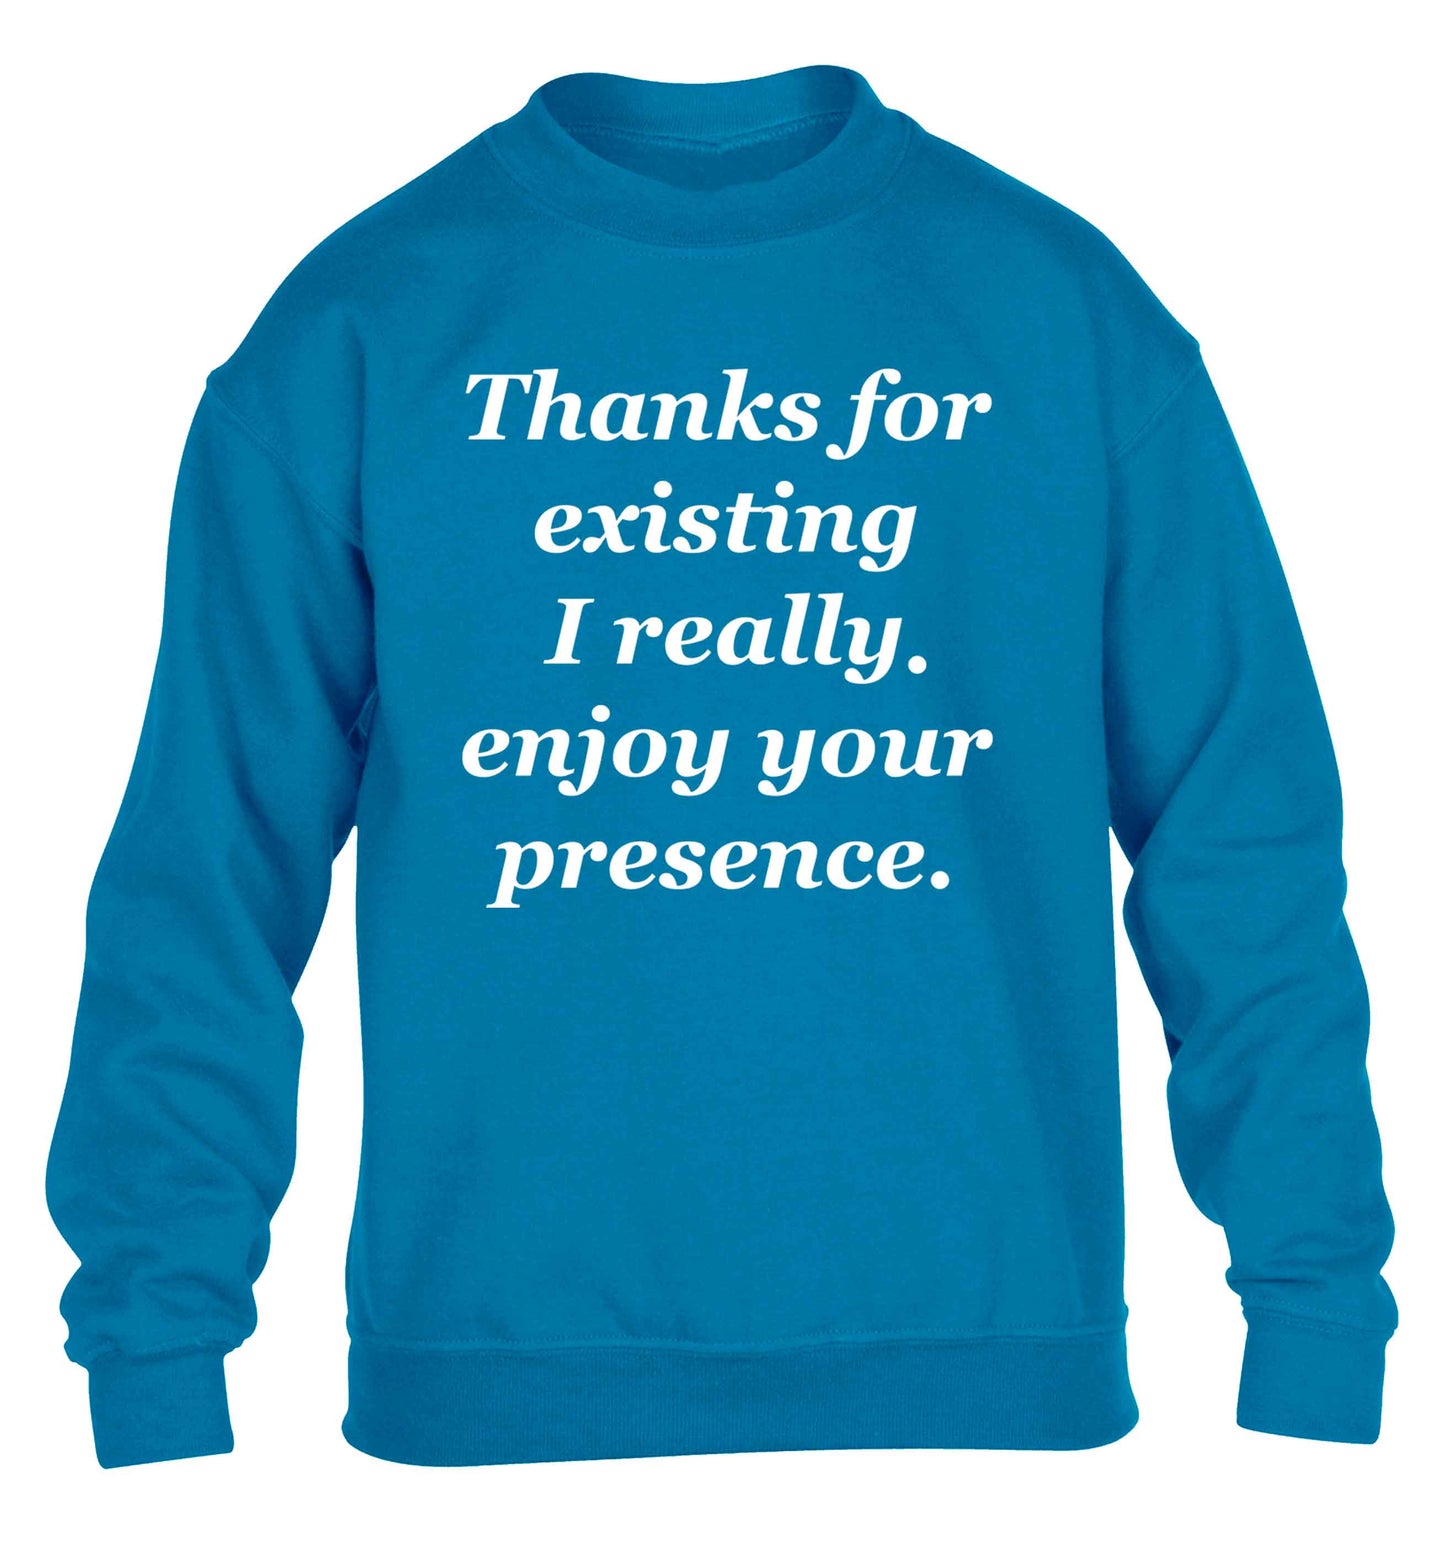 Thanks for existing I really enjoy your presence children's blue sweater 12-13 Years